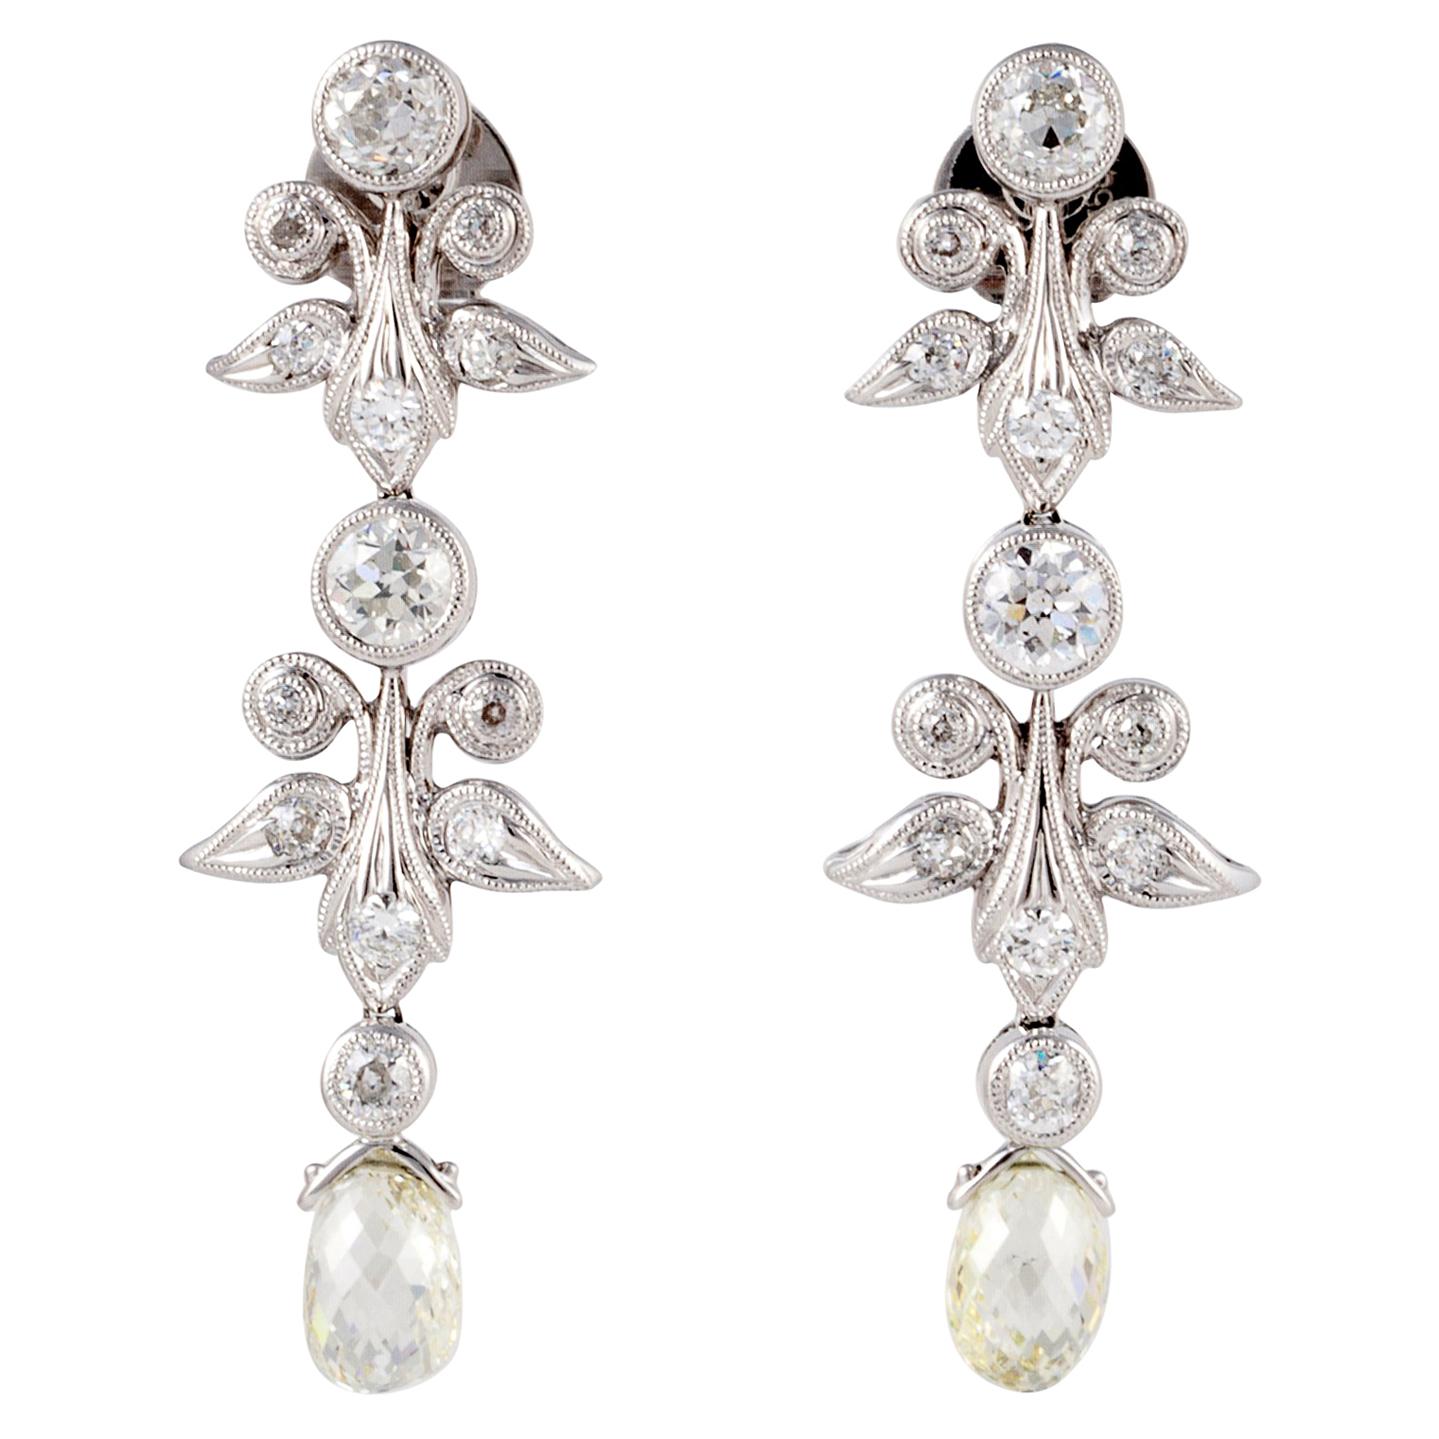 18K White Gold Garland Style Diamond Earrings with Briolette Drops